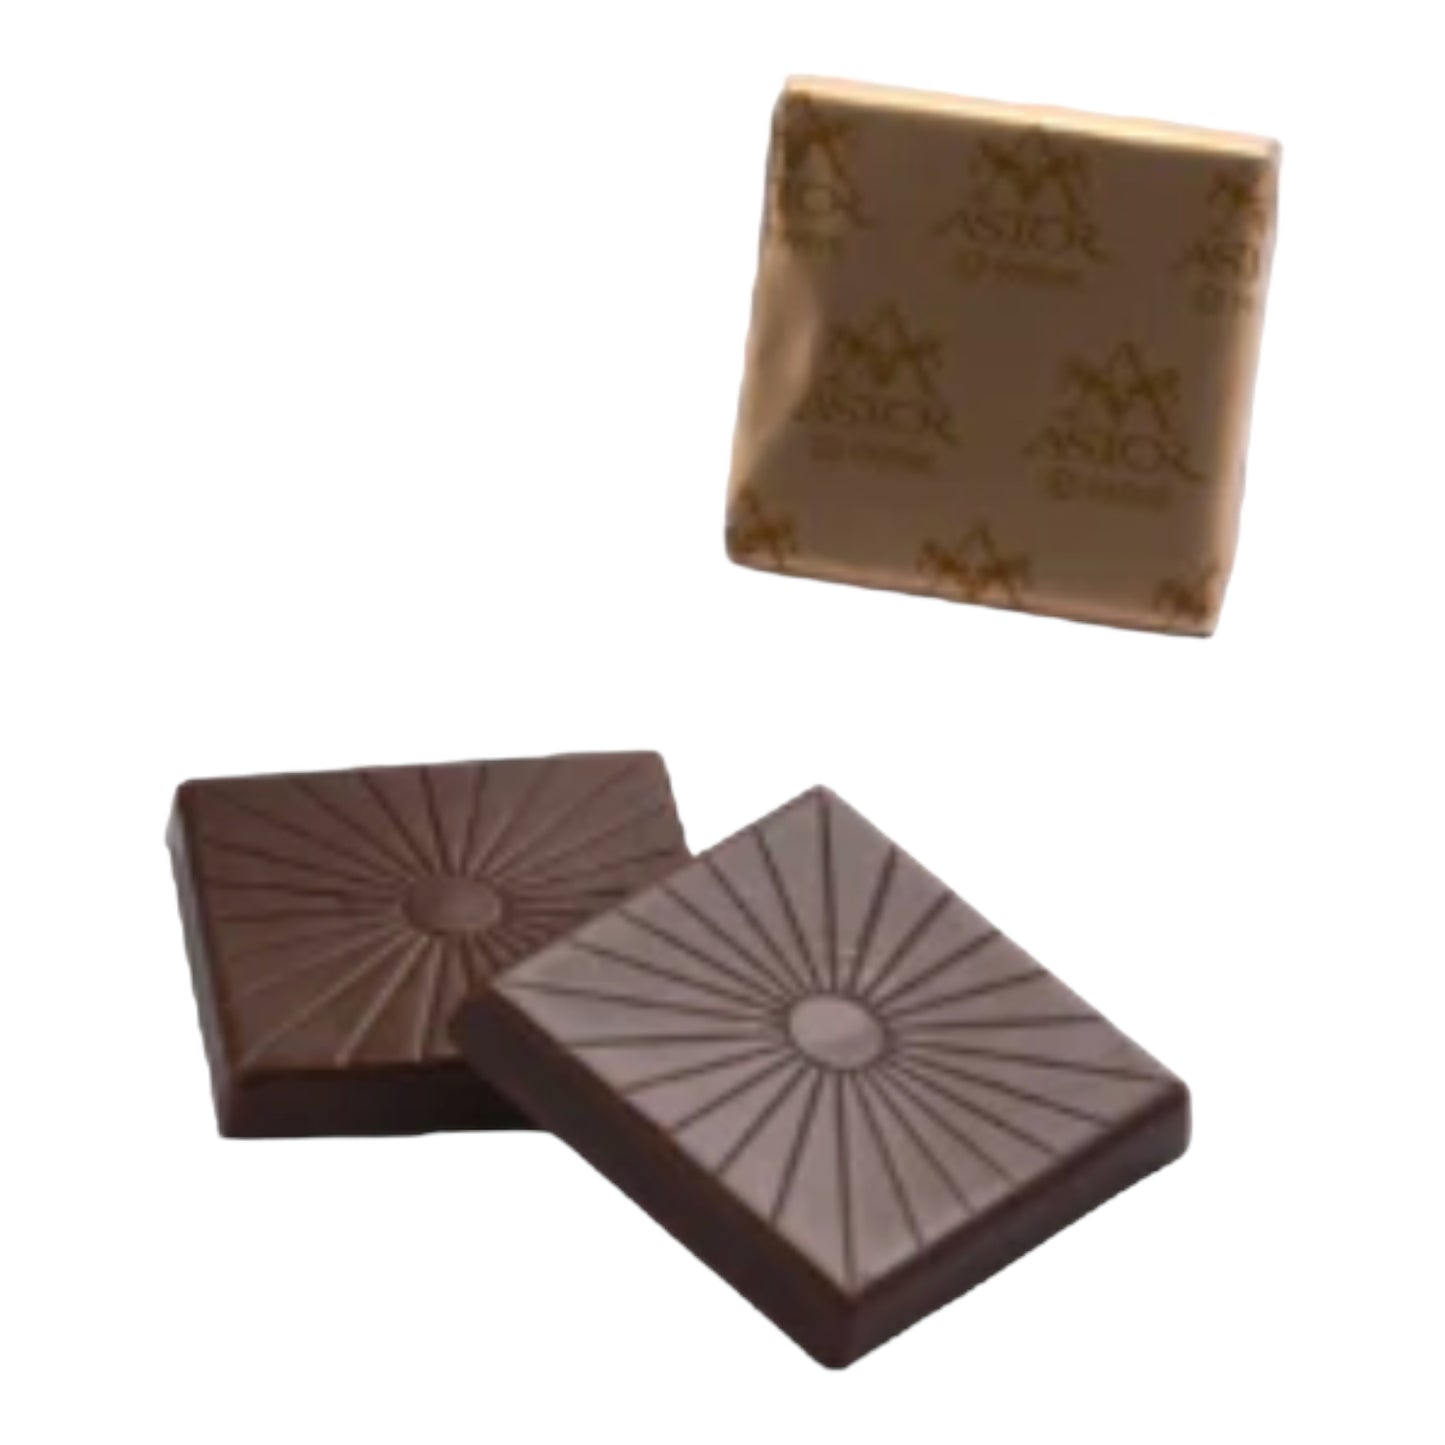 Dark Chocolate Squares, Gold or Silver